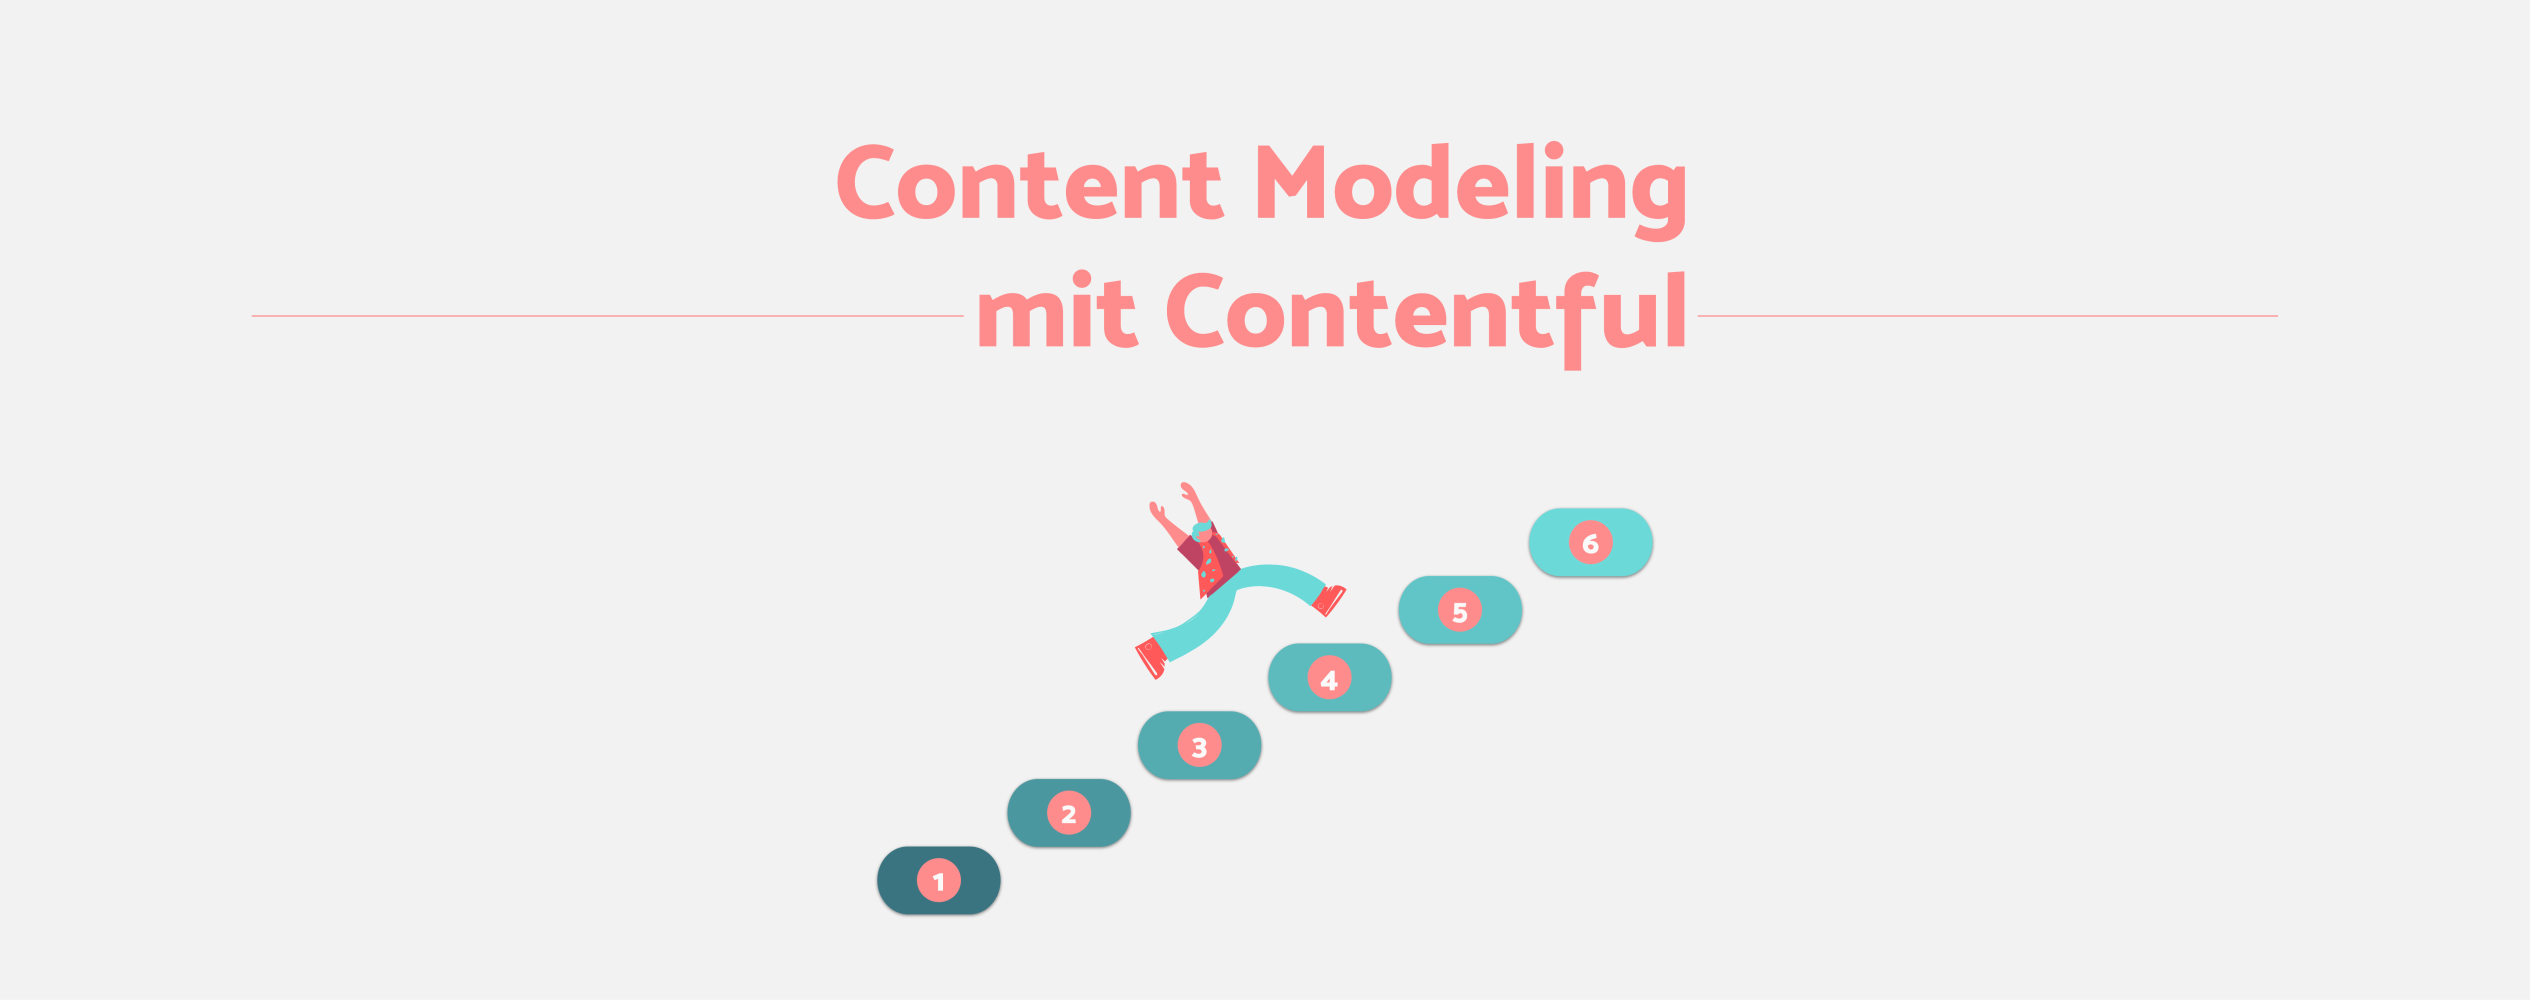 Image of Blogpost Content Modeling mit Contentful